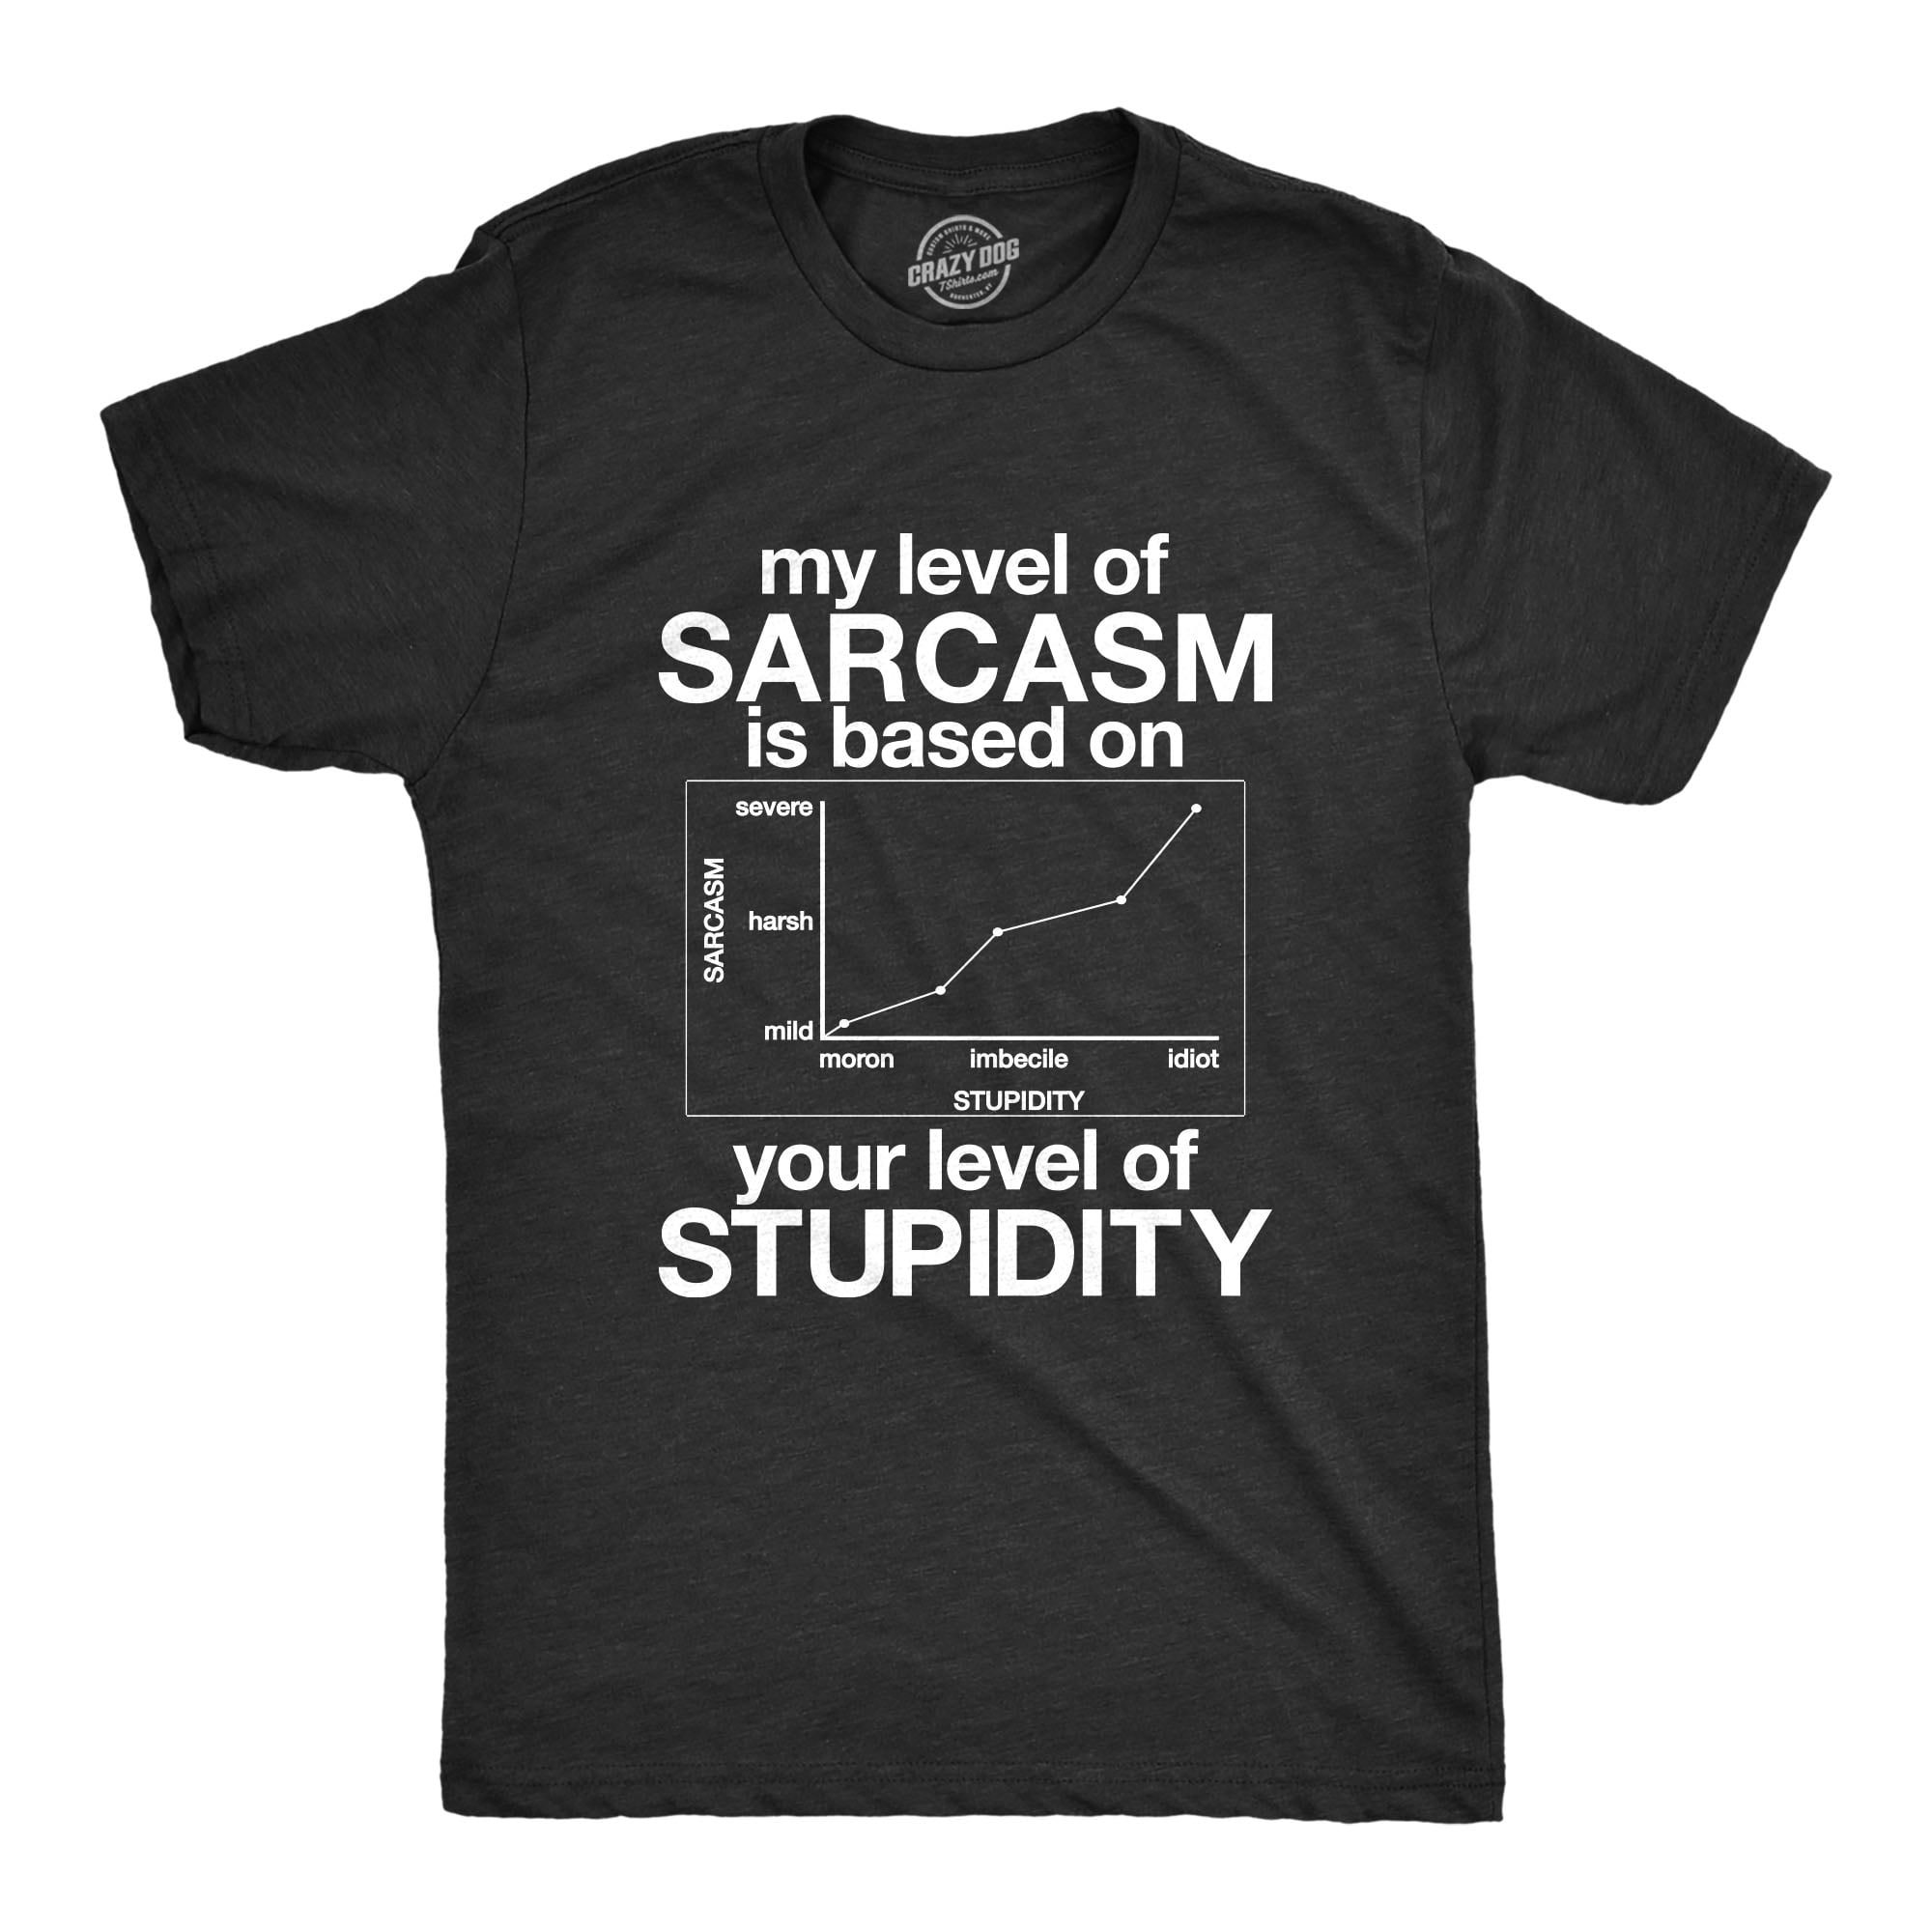 gift for husband sarcastic graphic tee funny shirts My level of sarcasm depends on your level of stupidity shirt funny gift for him tee